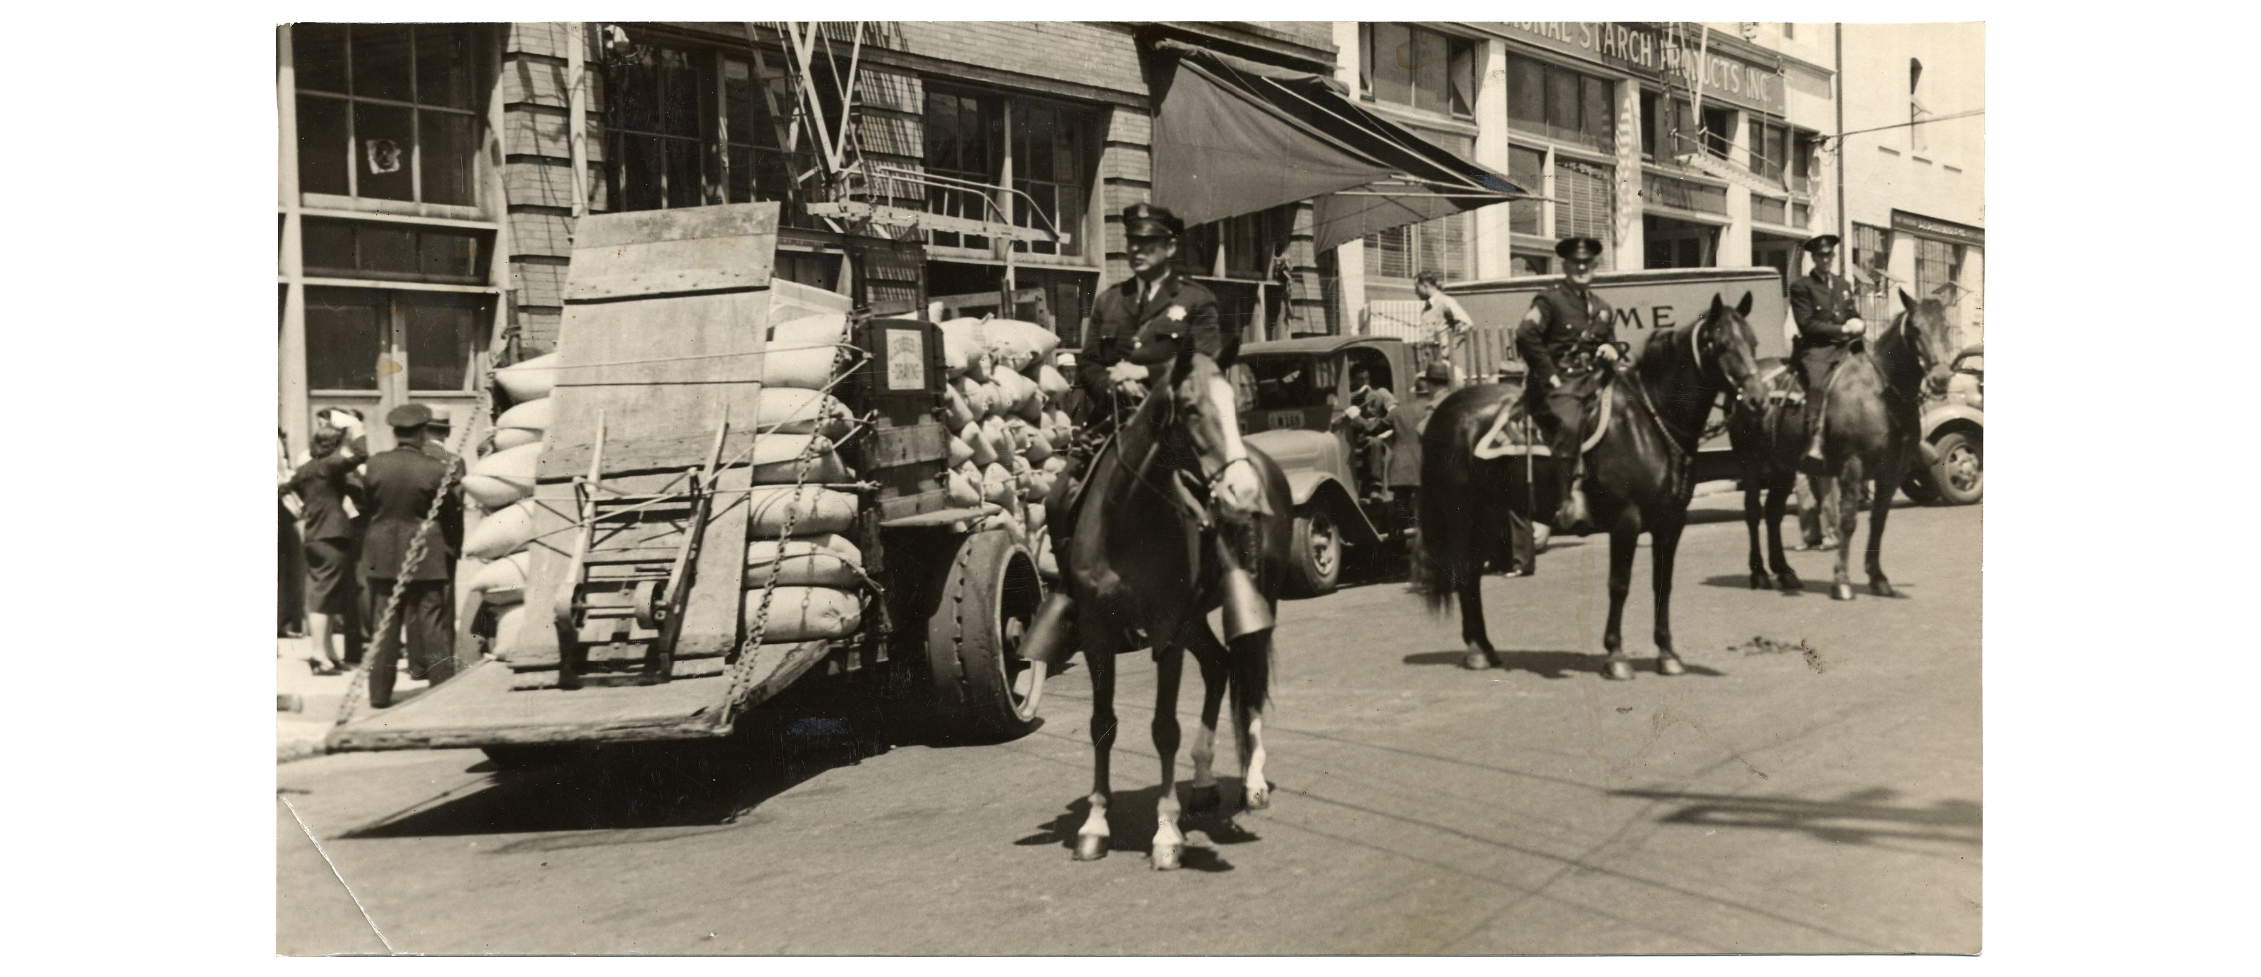 Black and white photo of police on horseback guarding a loaded truck.